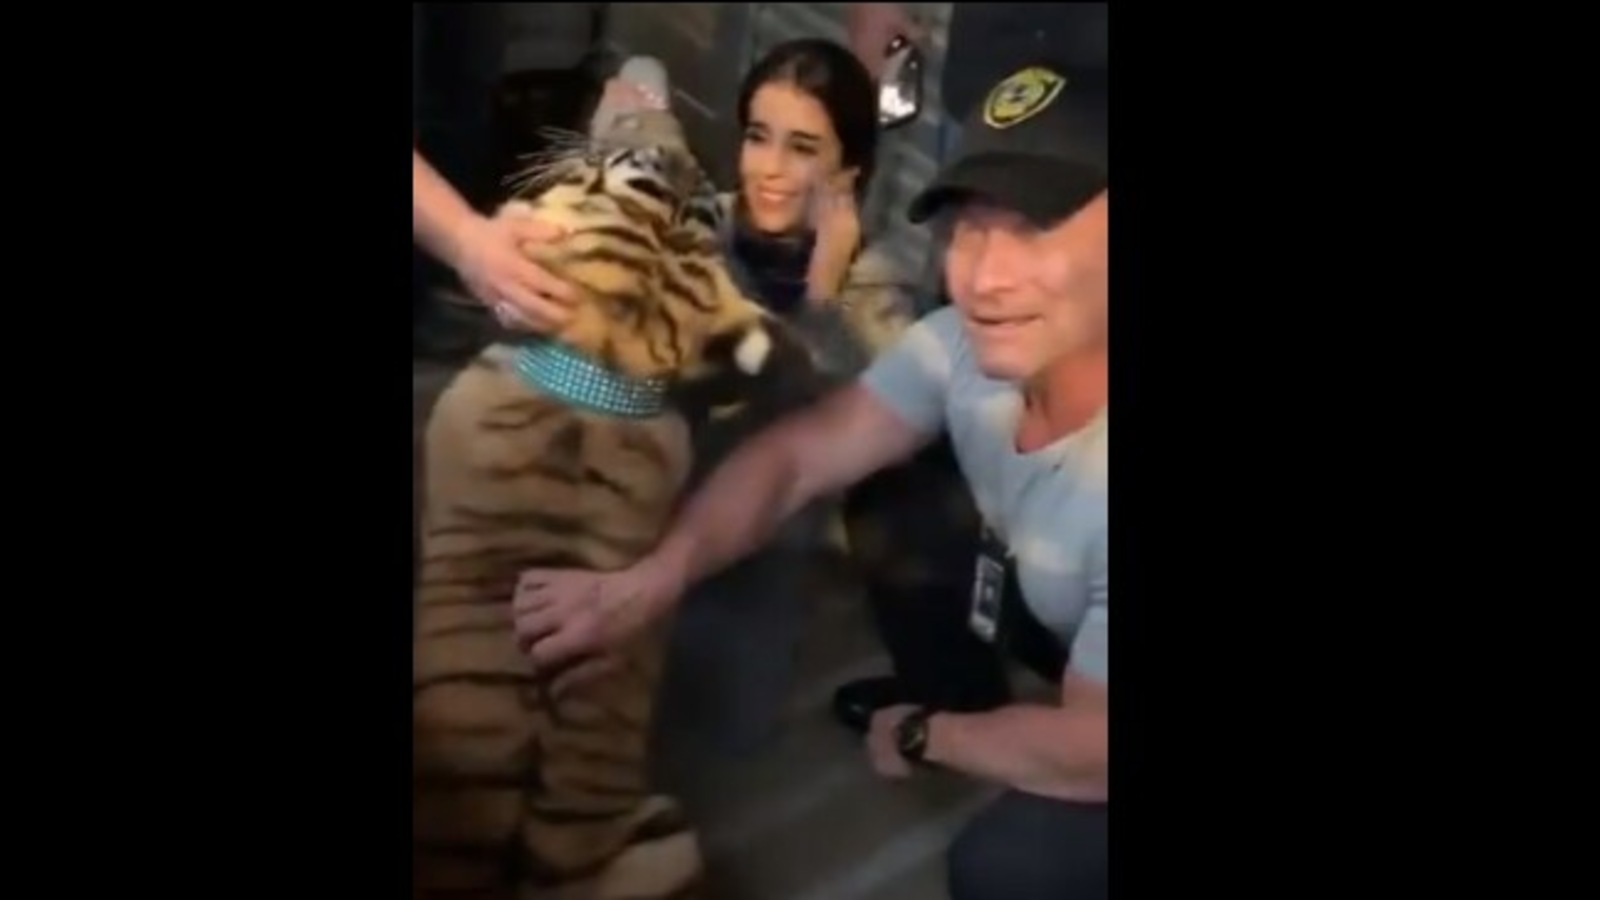 India, the missing Bengal tiger, found unharmed in Houston